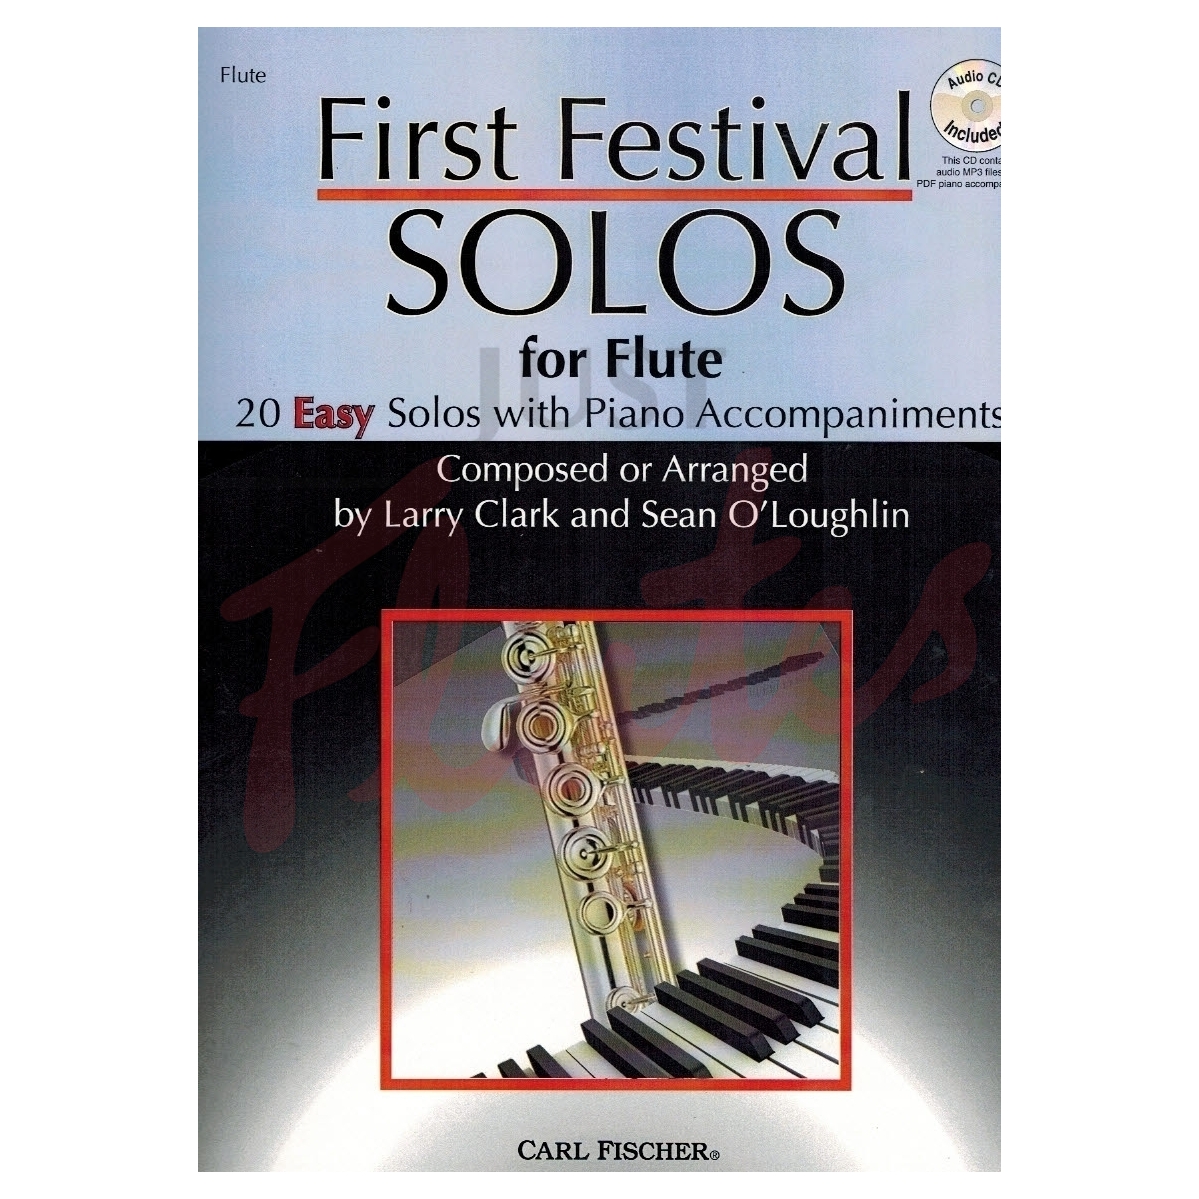 First Festival Solos